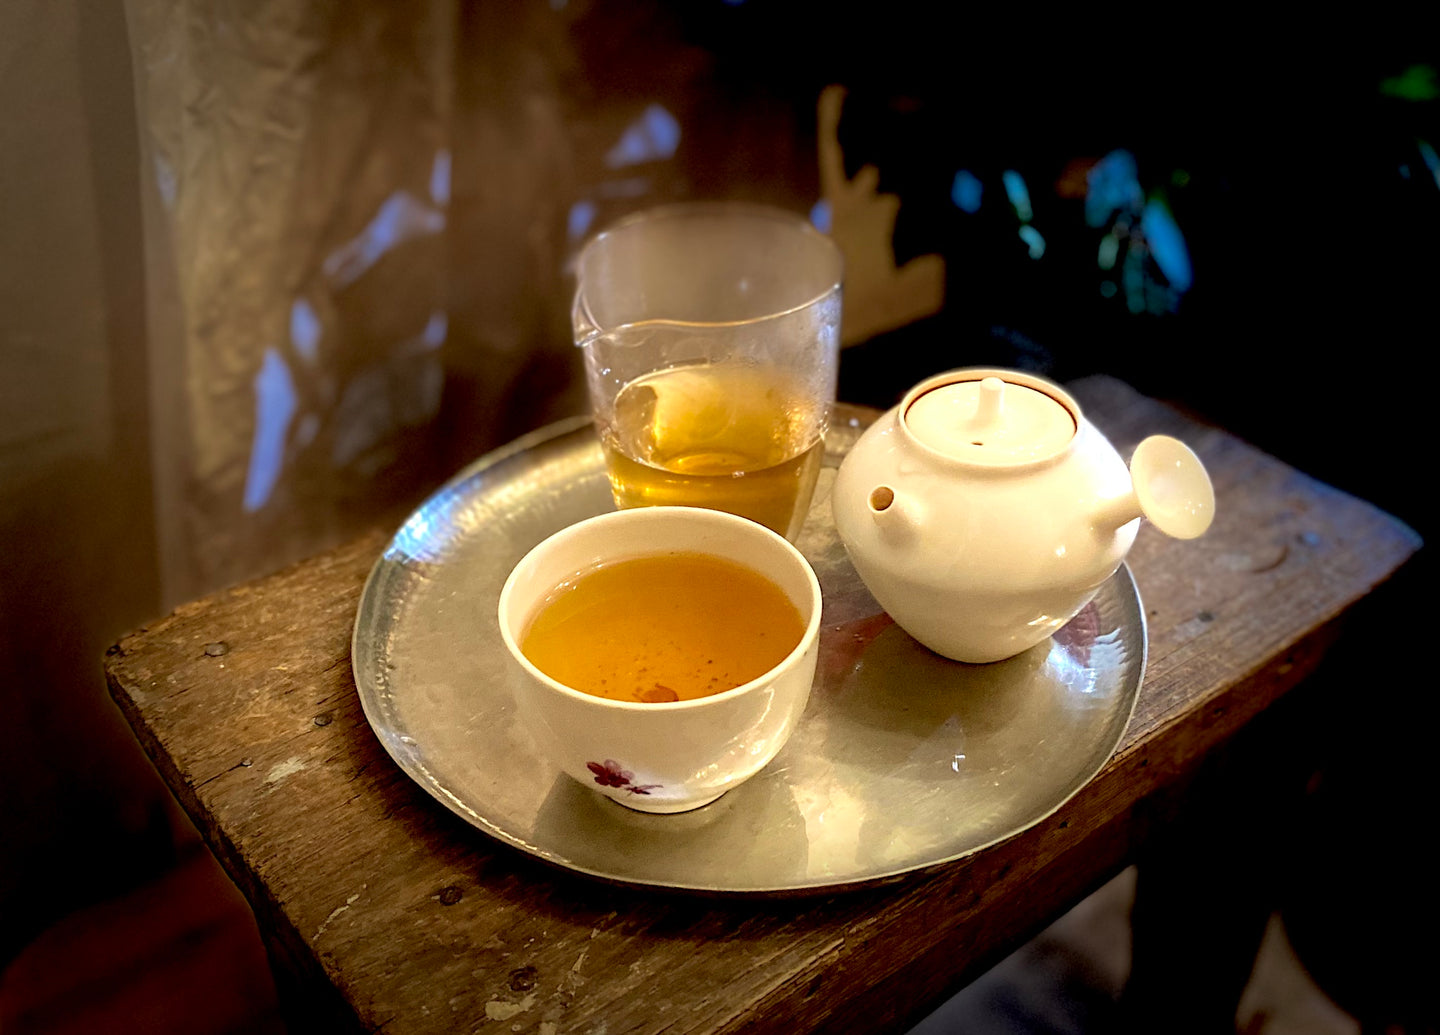 ANMO Siganture series #3 Darjeeling green Tea curated by Exoteaque made by Nalin Modha